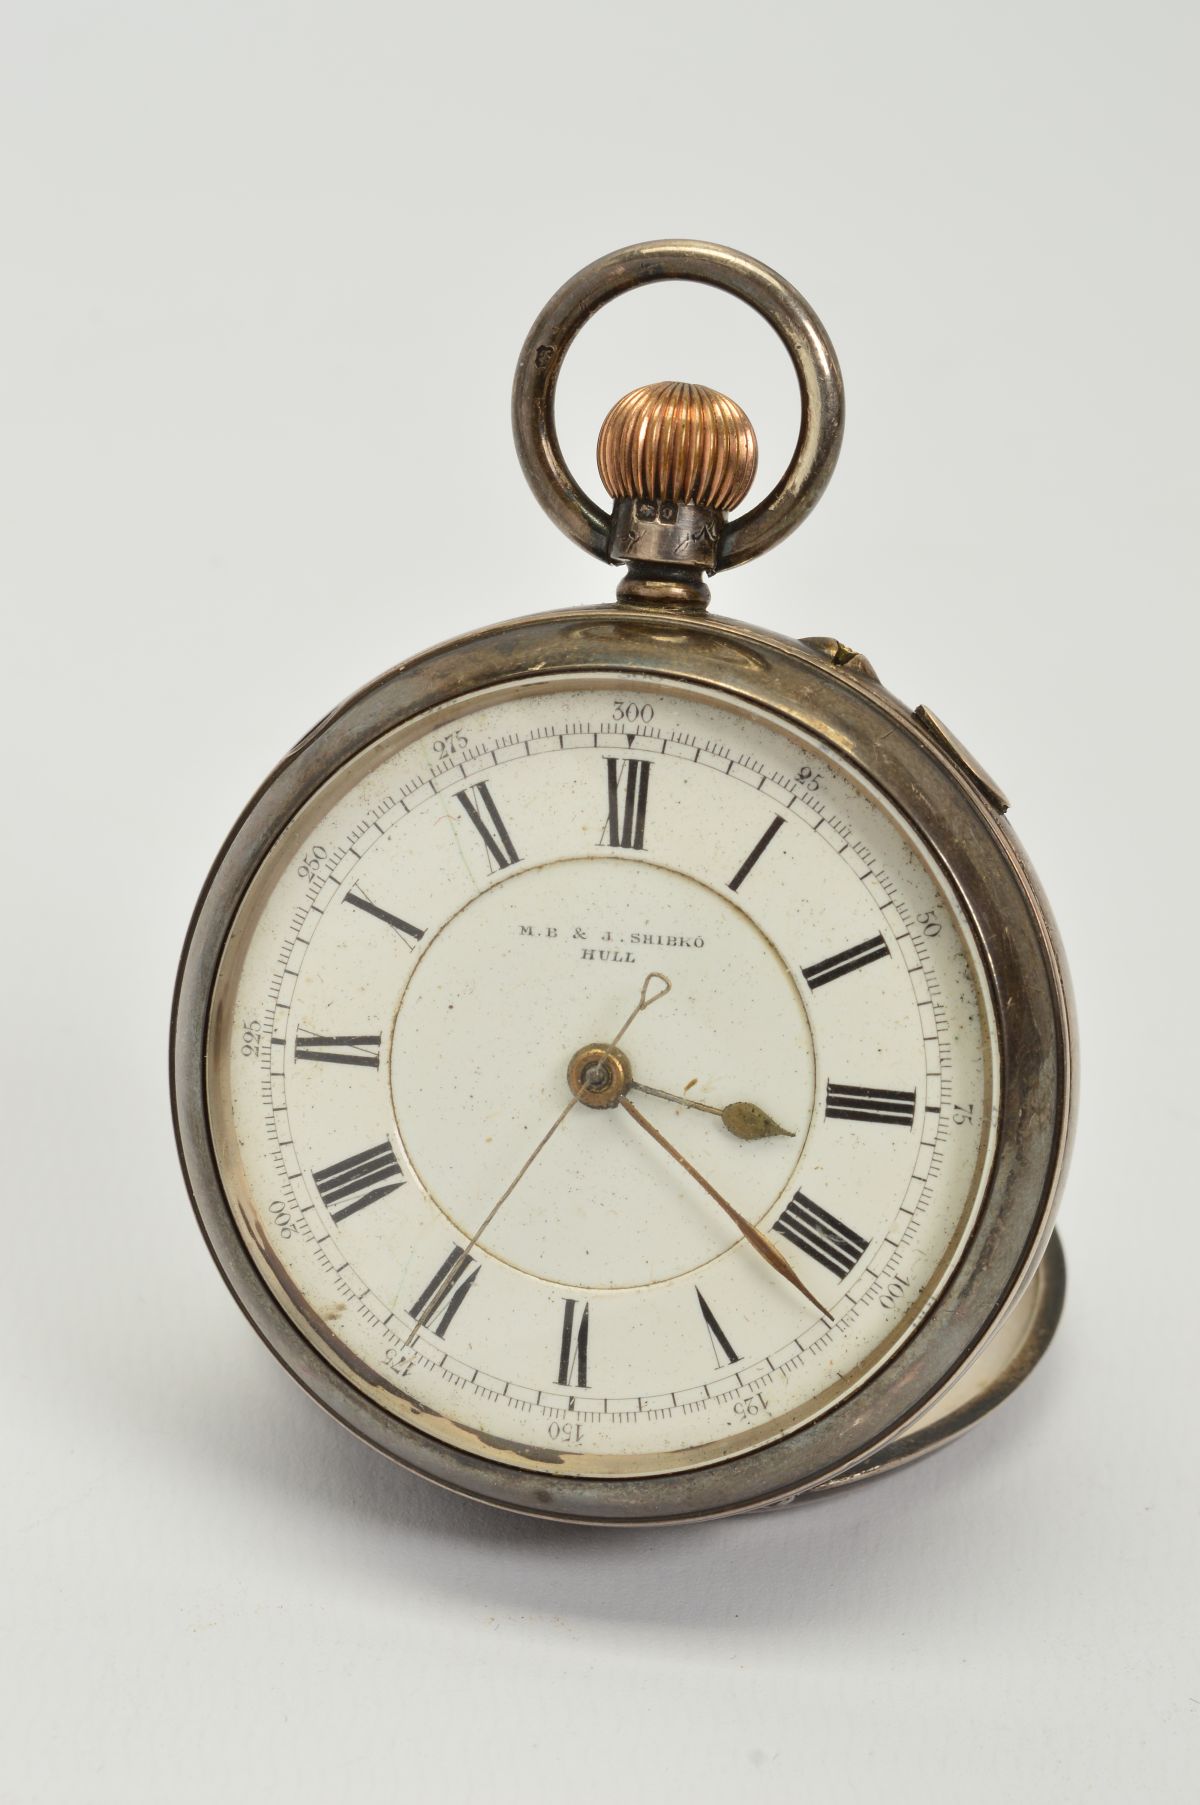 A LATE VICTORIAN SILVER OPEN FACE POCKET WATCH, the white face with black Roman numerals, with